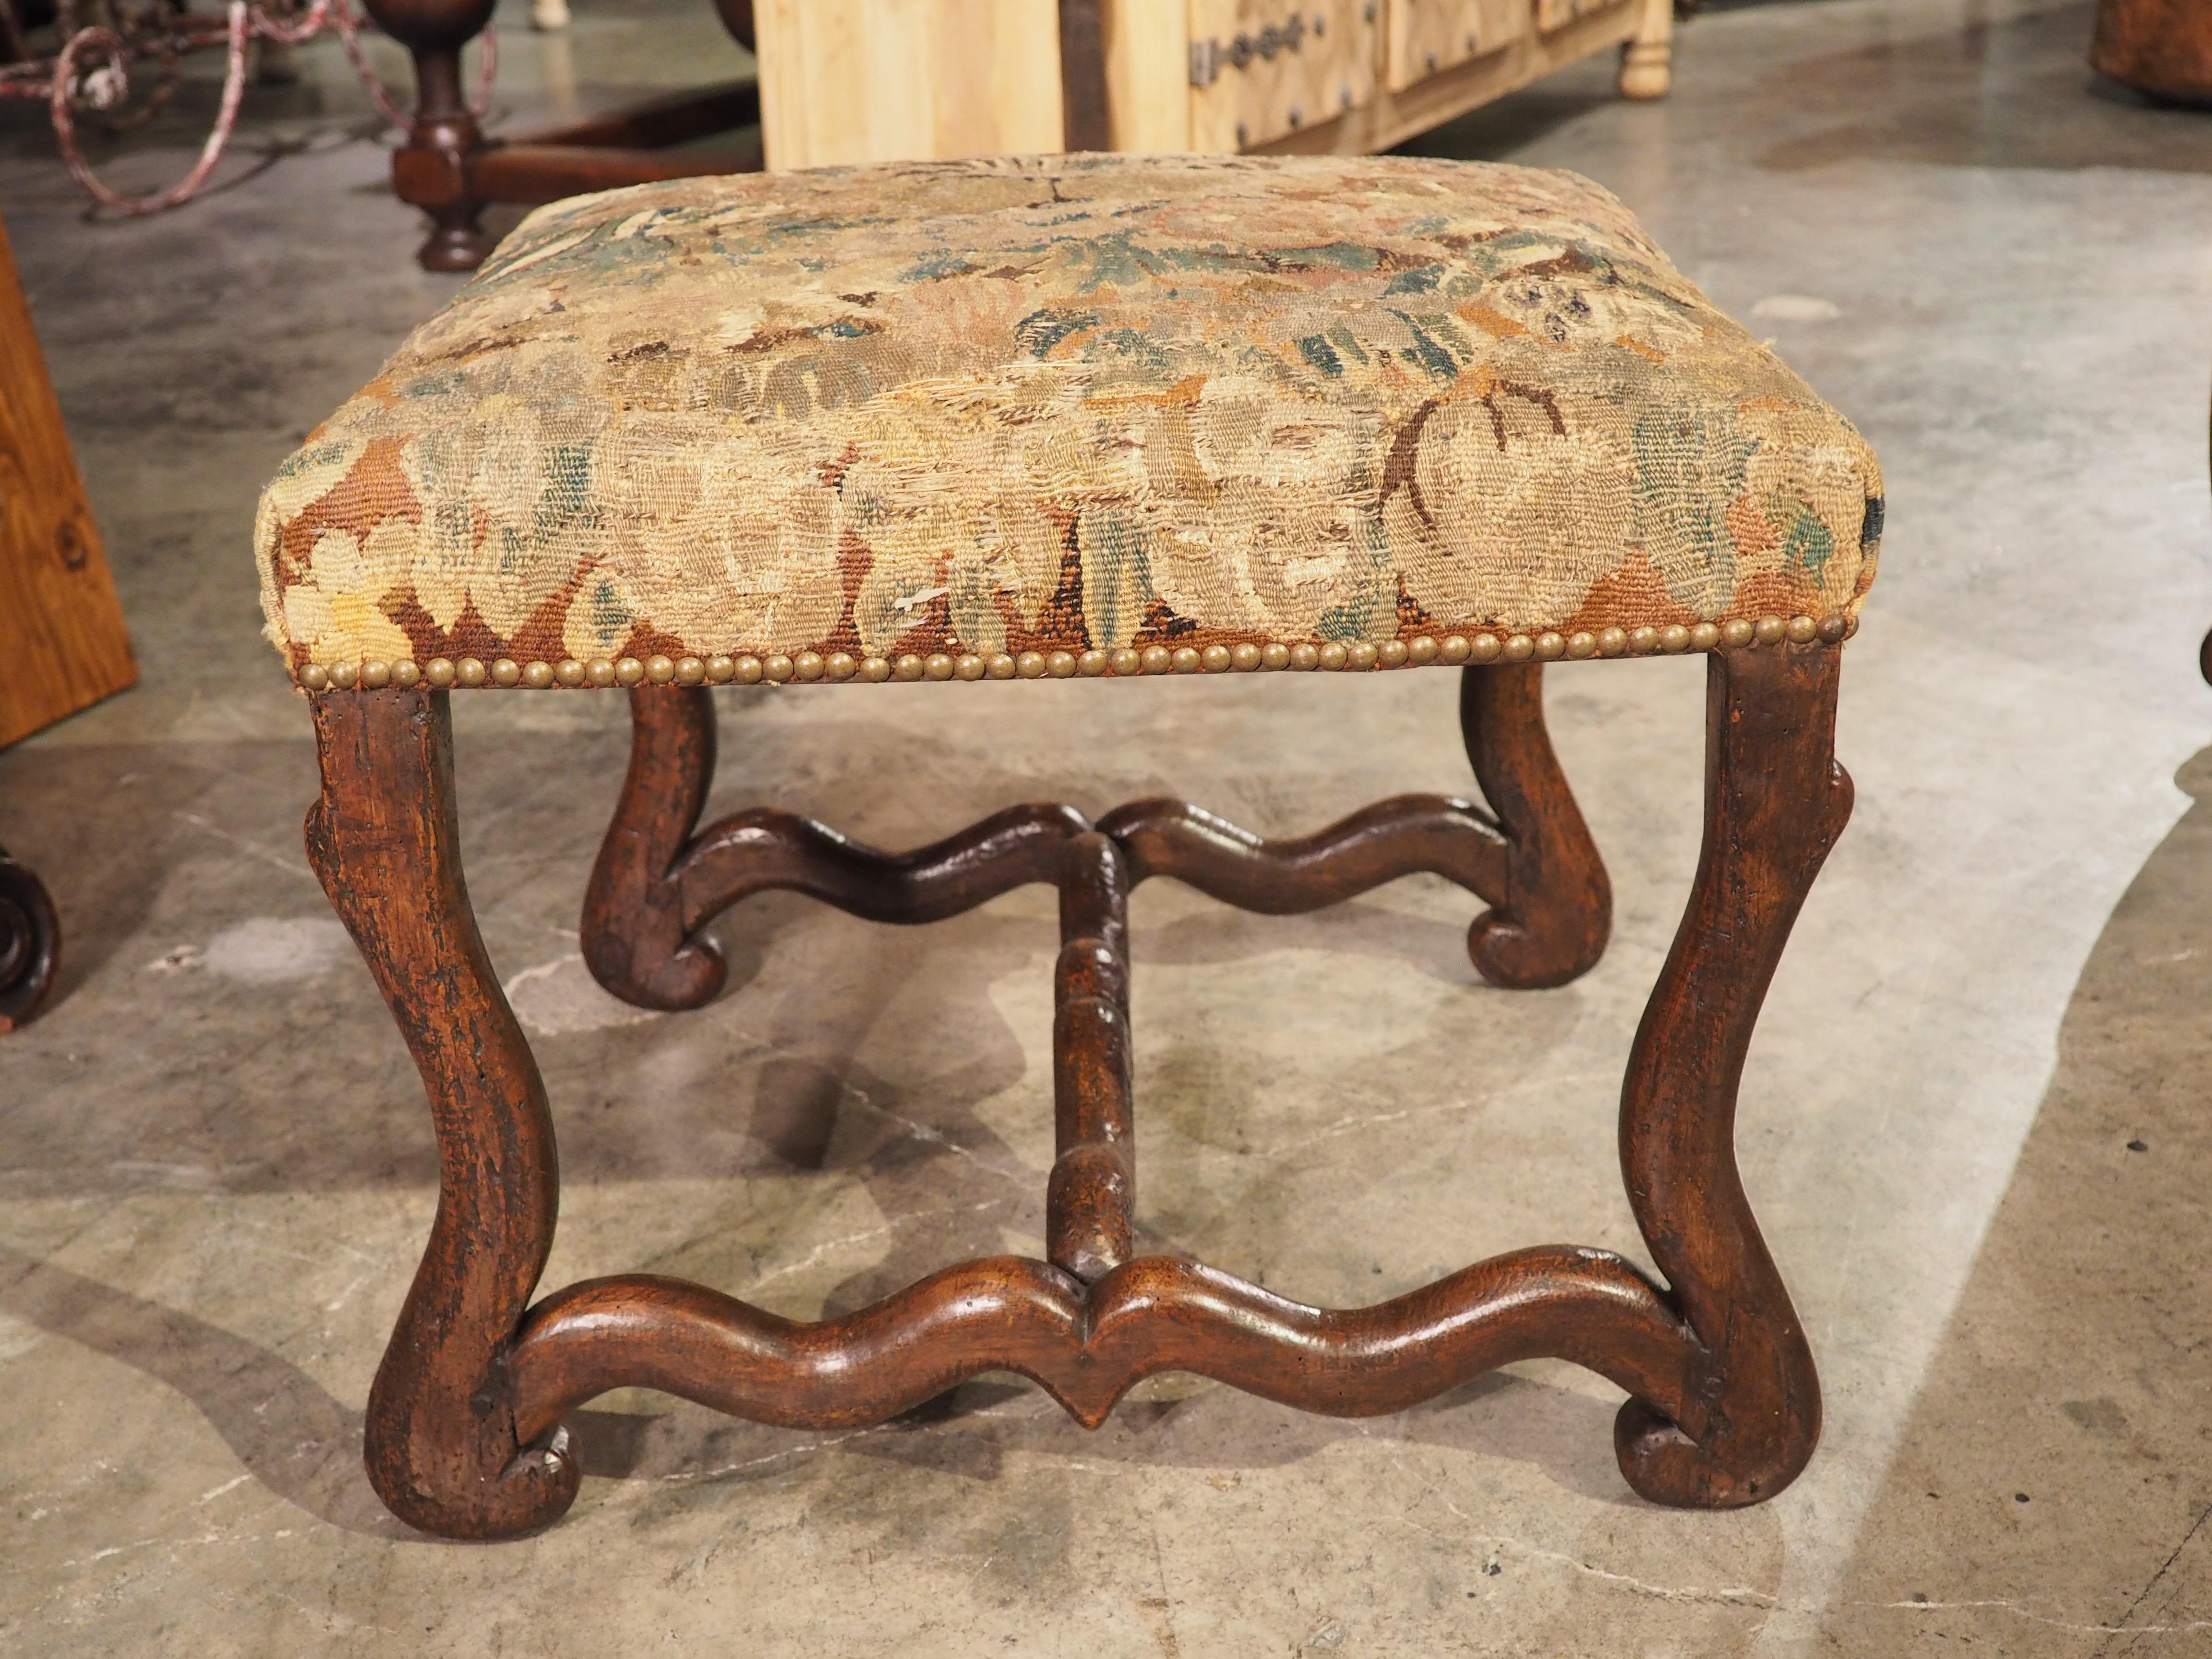 17th Century Period French Louis XIV Walnut Wood and Tapestry Os de Mouton Tabouret